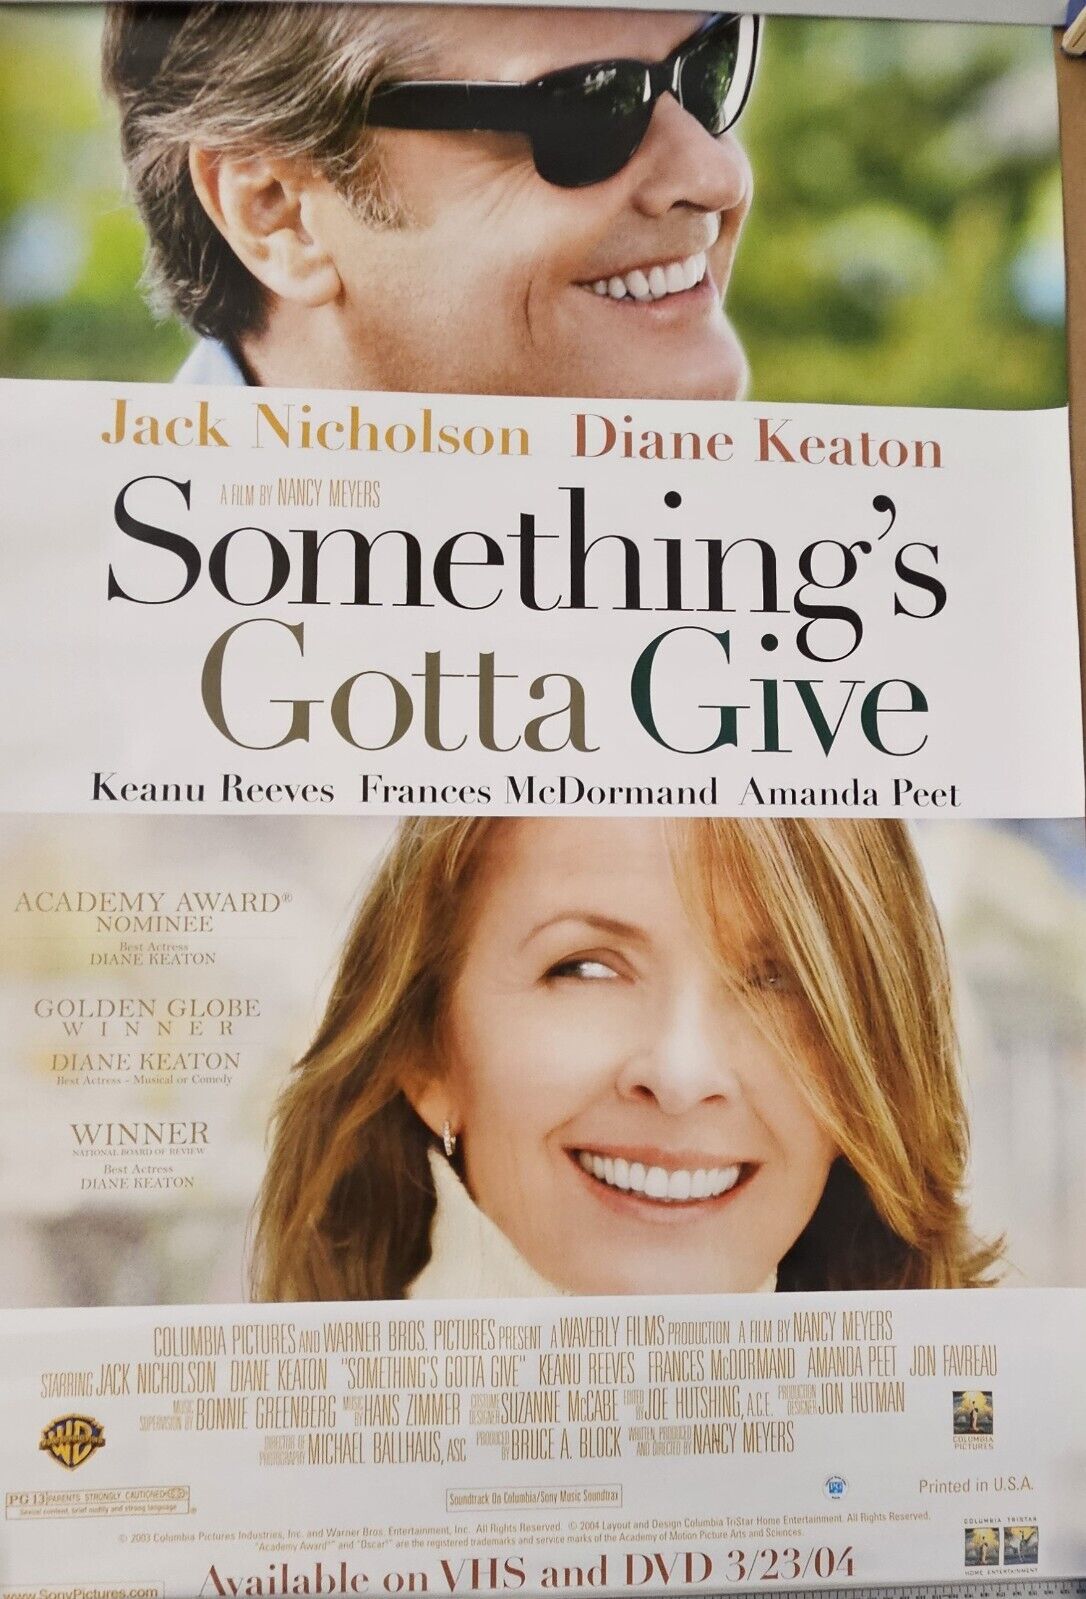 Jack  Nicholson and Diane Keaton in Something's Gotta Give 27 x 40 DVD  poster